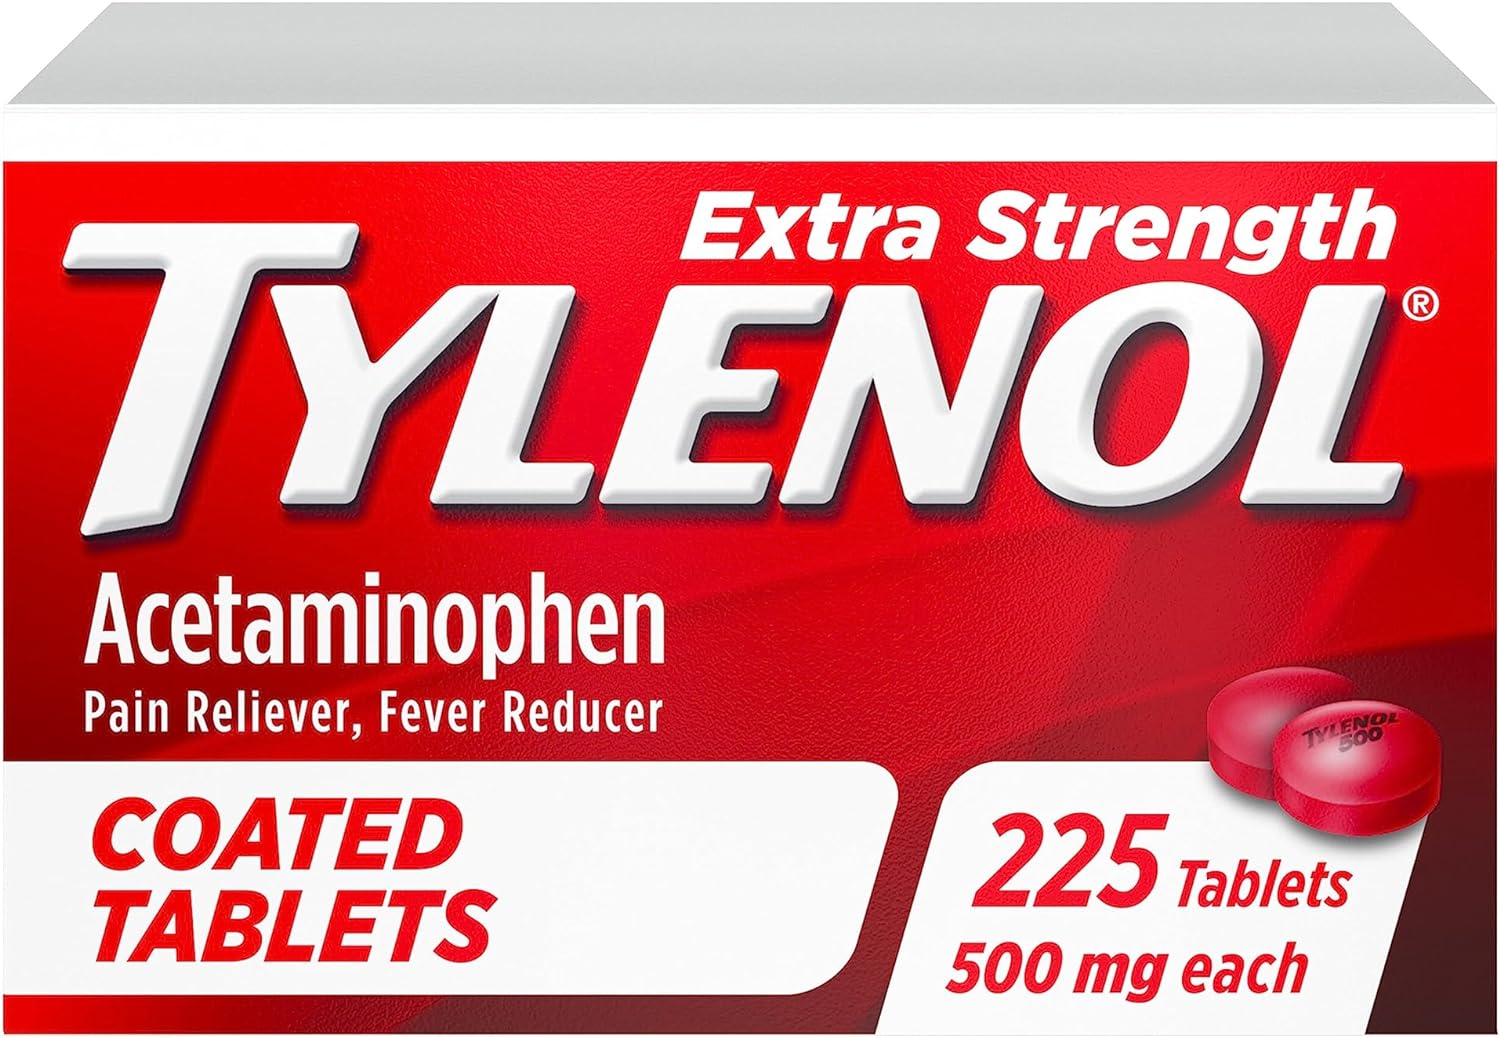 Tylenol Extra Strength Coated Tablets, Acetaminophen Adult Pain Relief & Fever Reducer, 225 ct